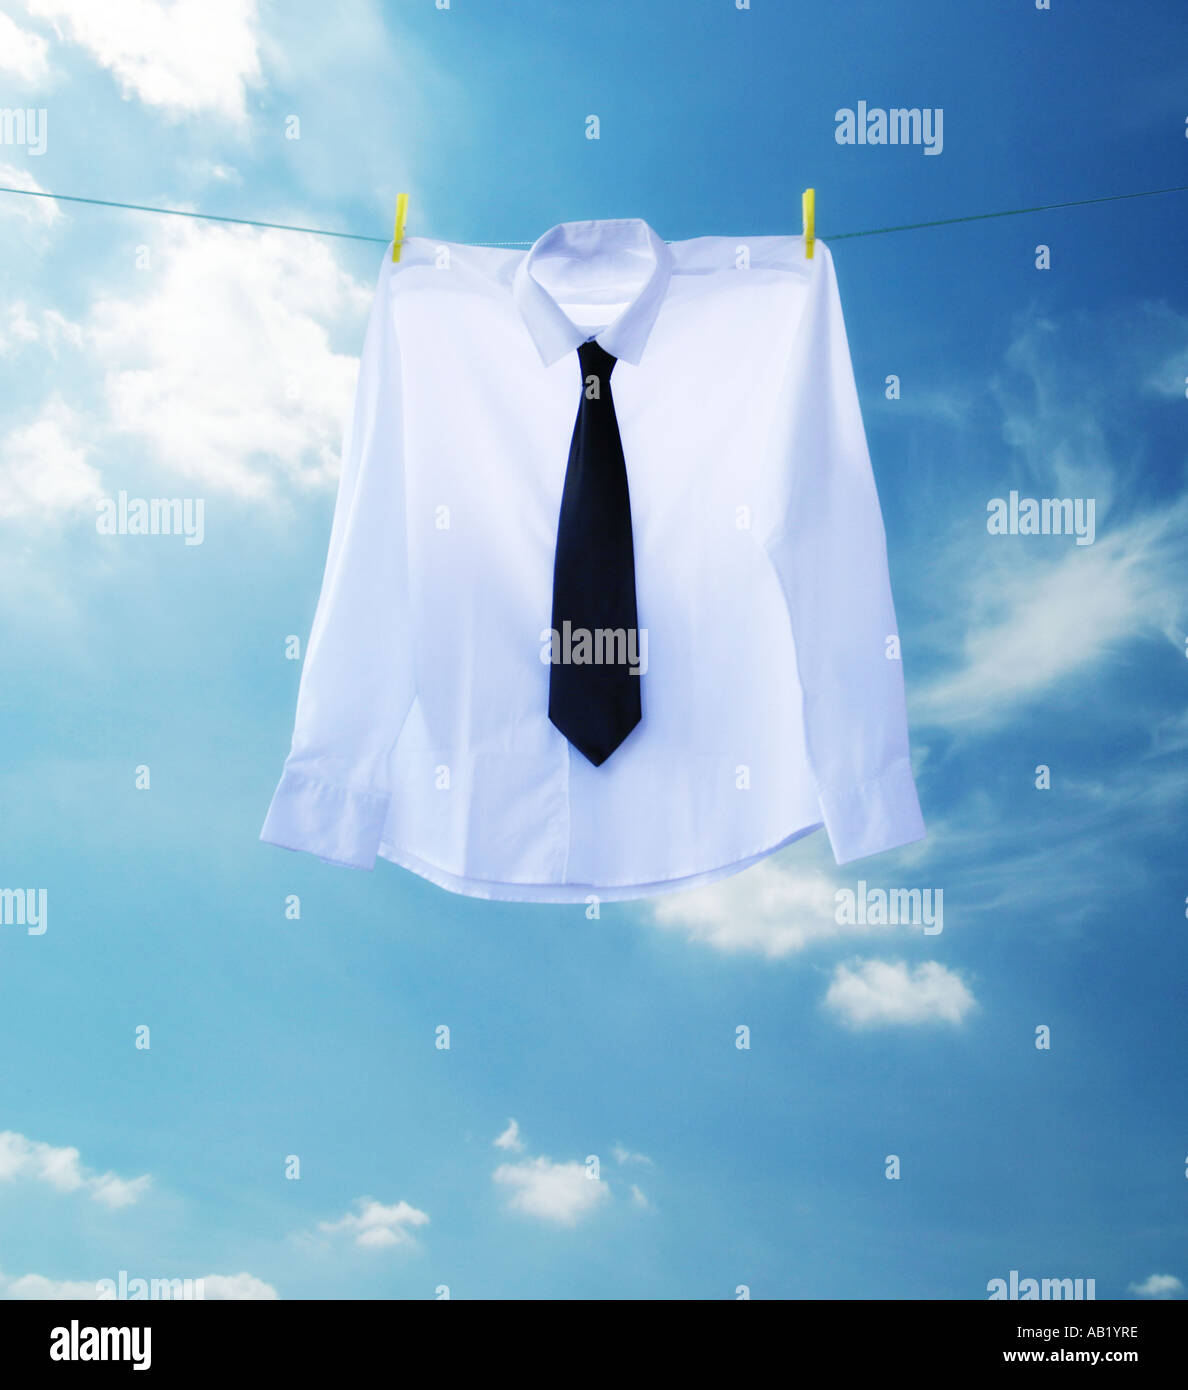 a shirt and tie handing on a washing line Stock Photo